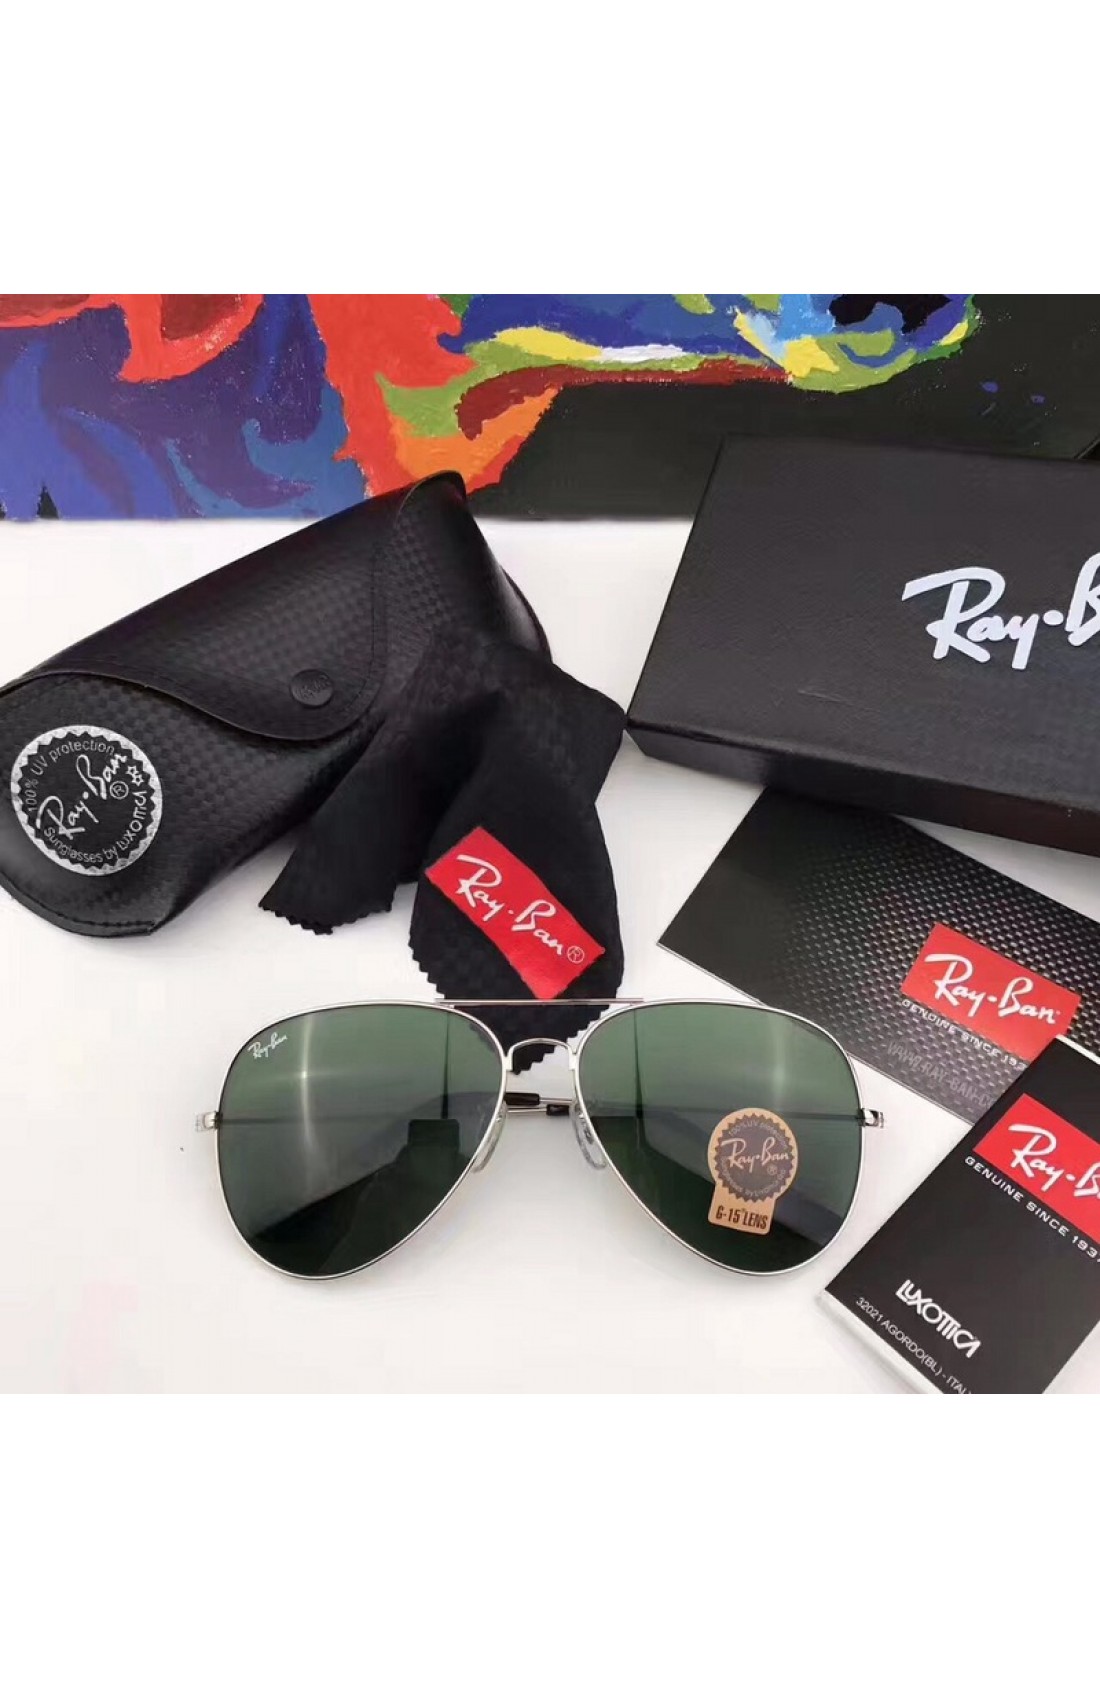 ray bans on sale cheap